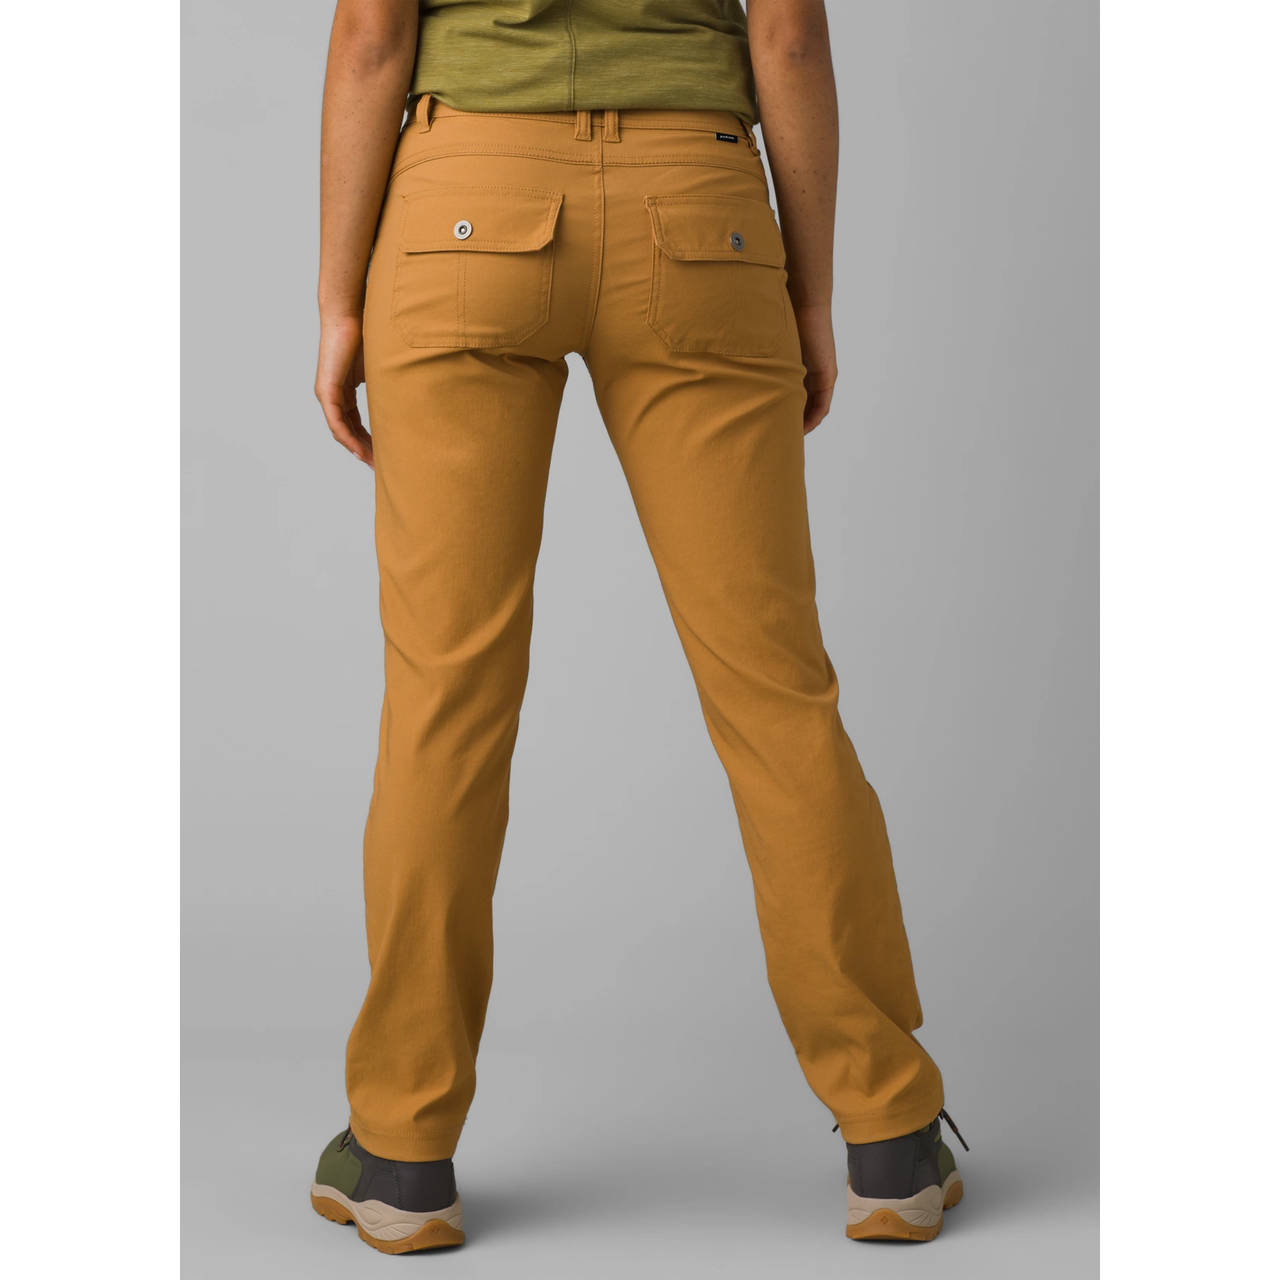 Halle AT Straight Pant, Pants